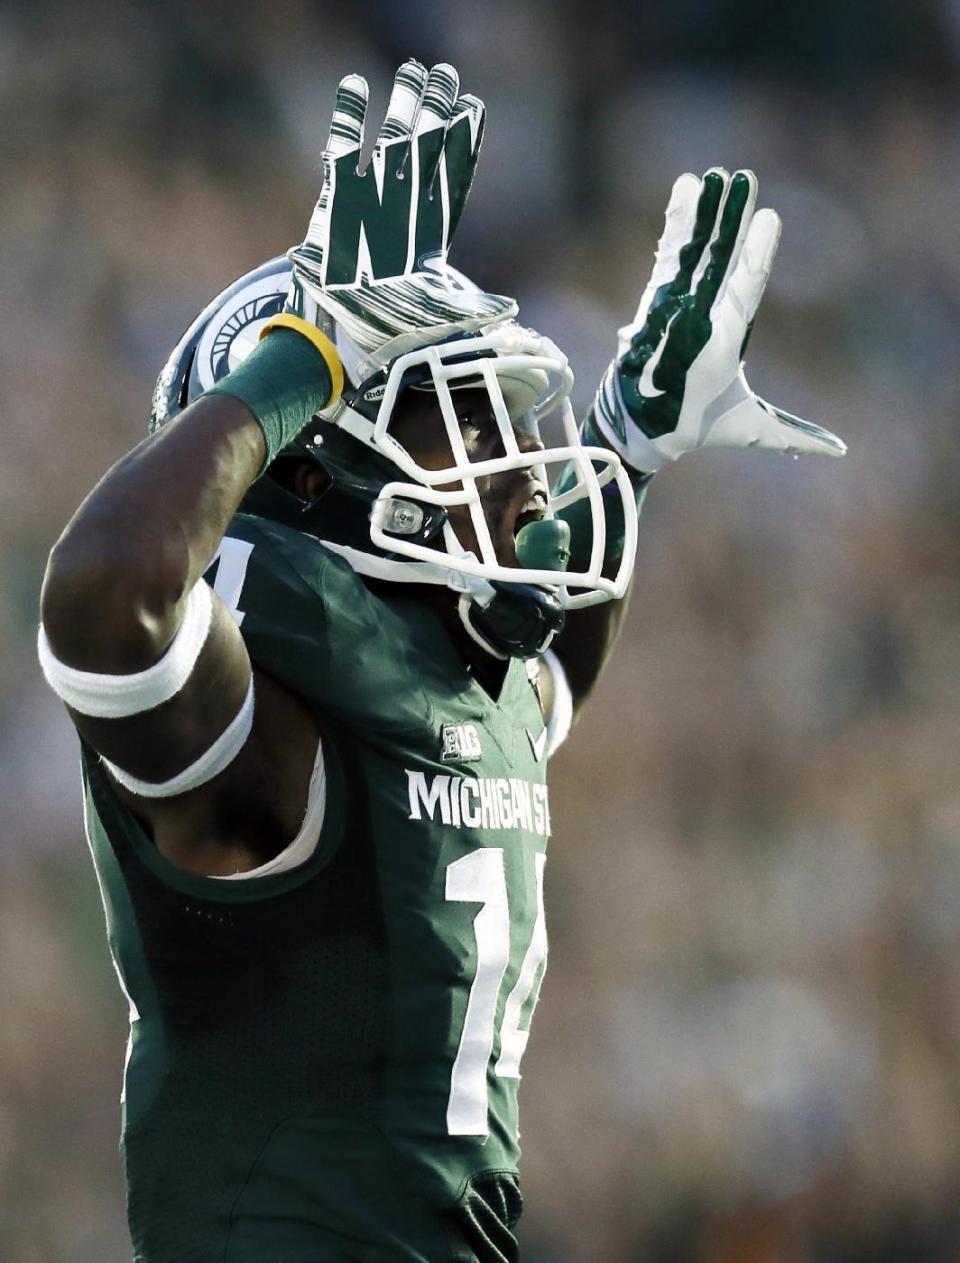 Michigan State wide receiver Tony Lippett celebrates his touchdown against Stanford during the second half of the Rose Bowl NCAA college football game on Wednesday, Jan. 1, 2014, in Pasadena, Calif. (AP Photo/Danny Moloshok)